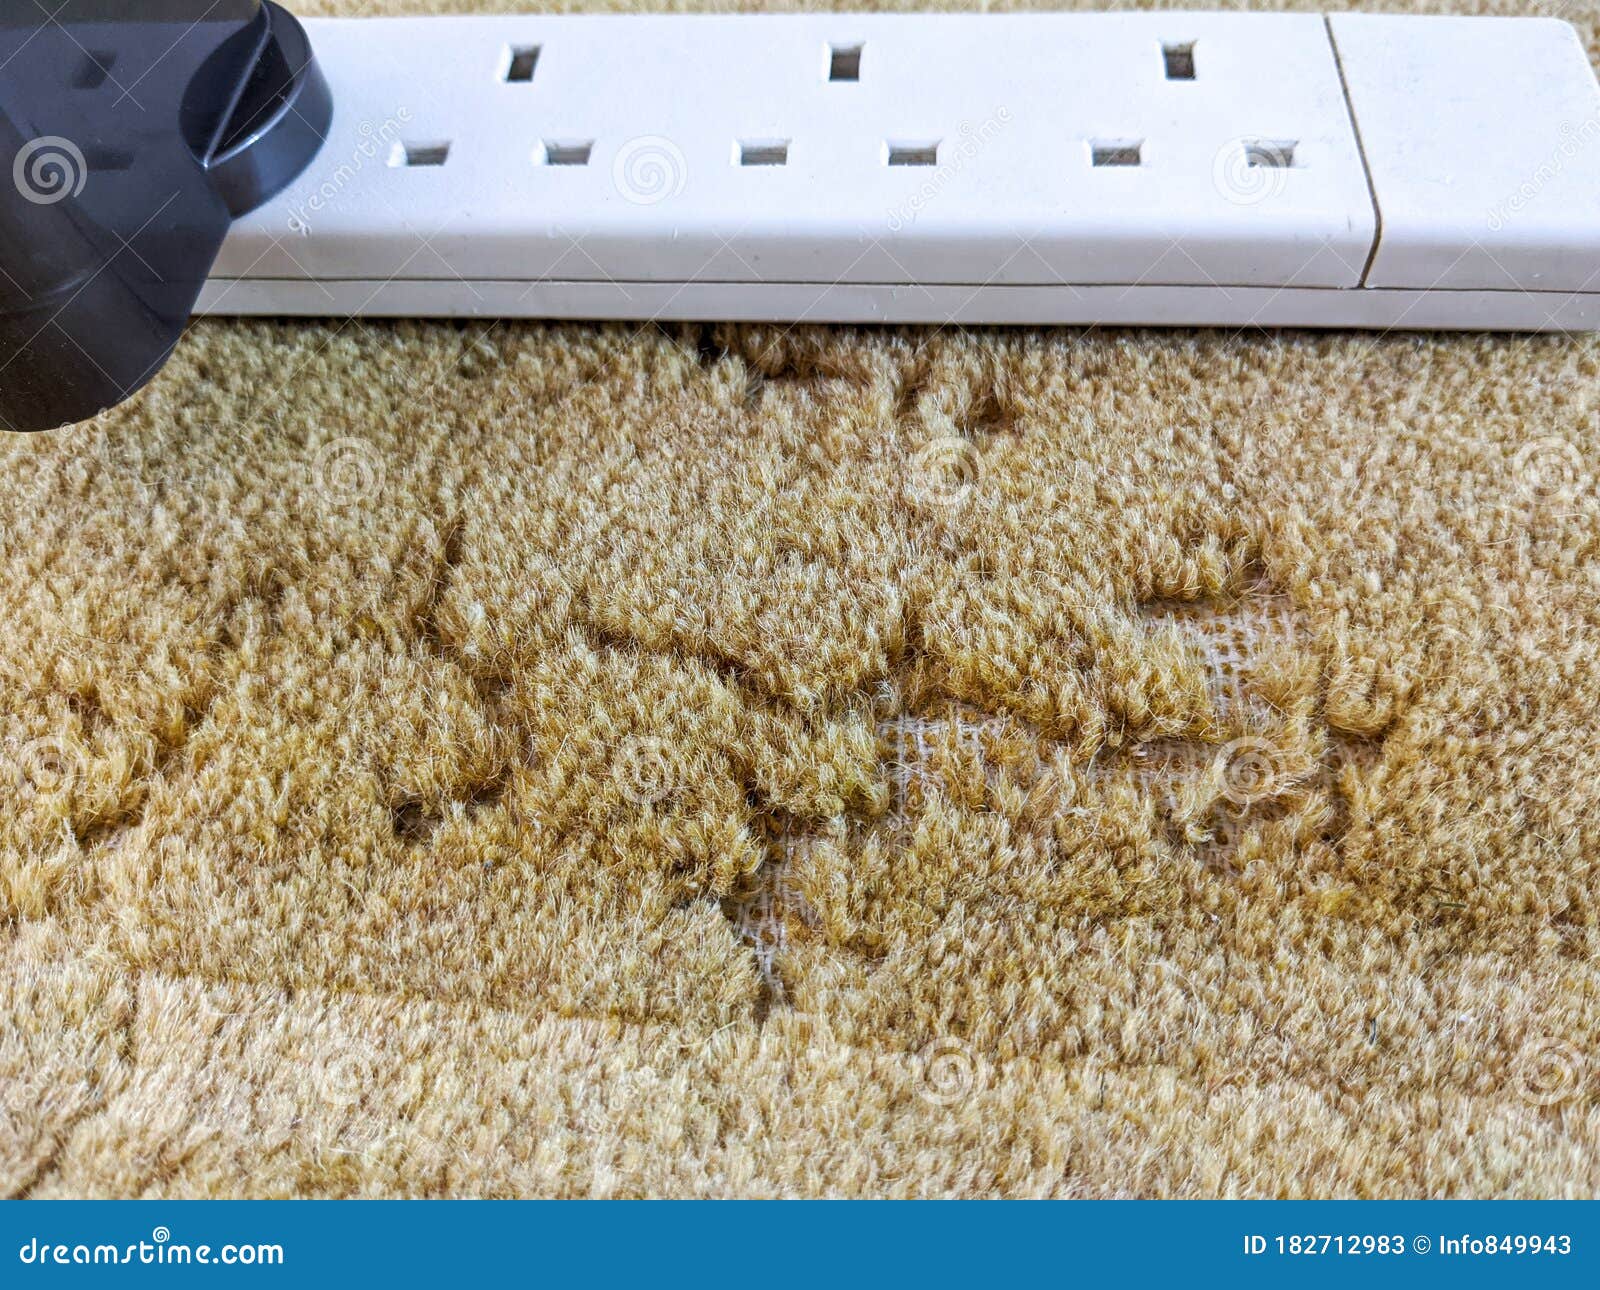 damage caused to carpet by moths infestation